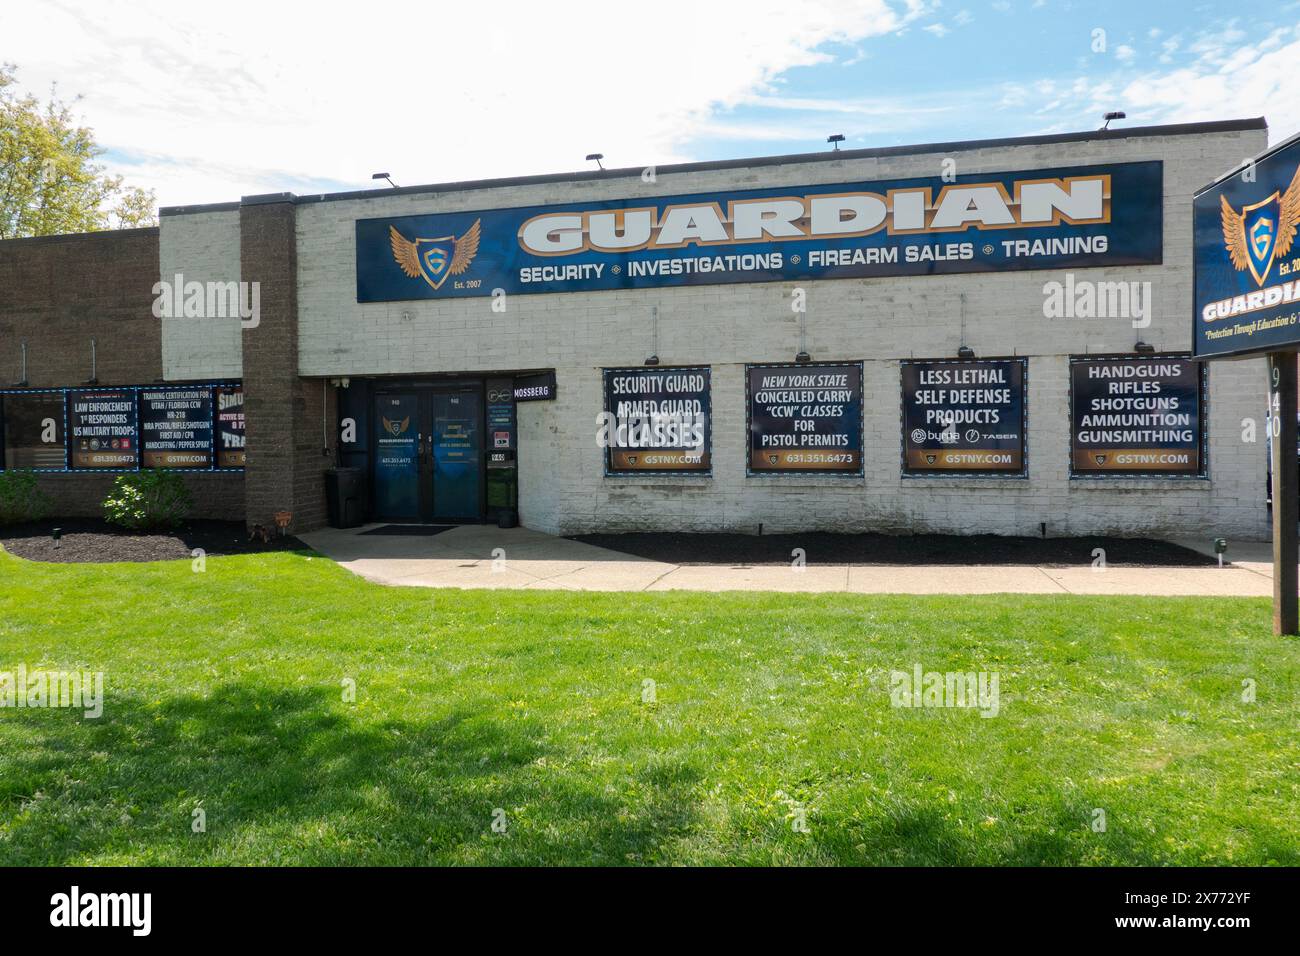 The exterior of Guardian Security Training who also offer firearms training, investigations and security. On Grand Blvd in Deer Park, Long Island, NY. Stock Photo